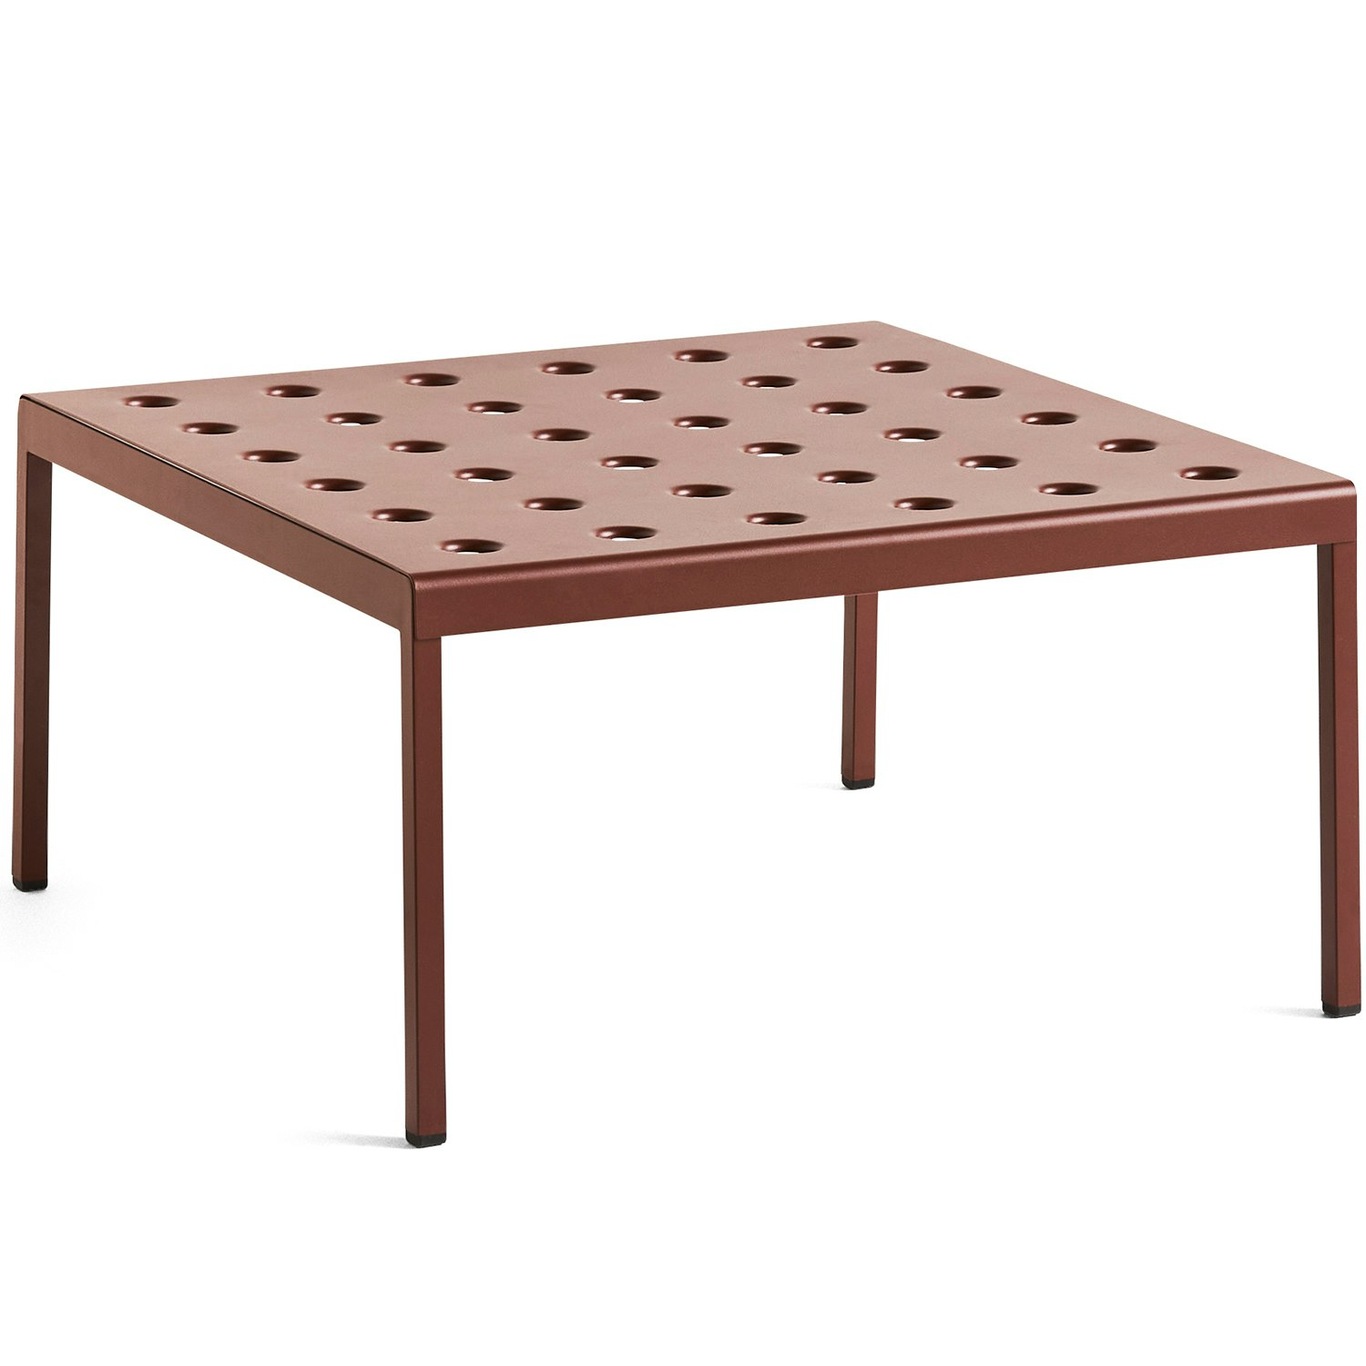 Balcony Lounge Table 75x76 cm, Iron Red